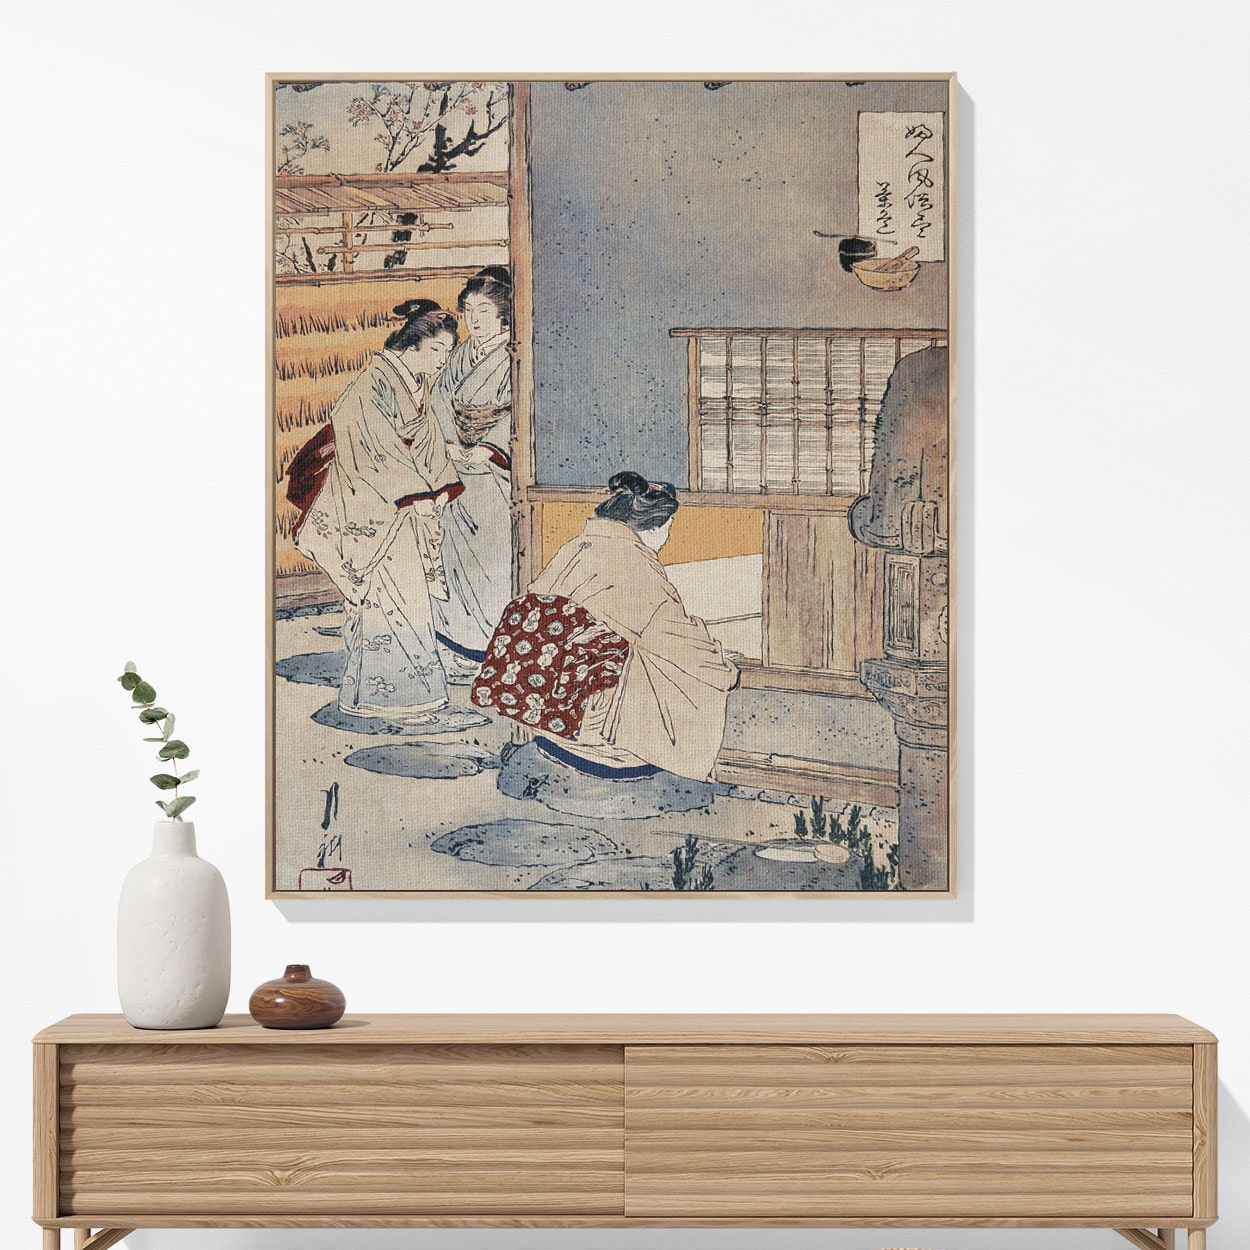 Japanese Women Working Woven Blanket Woven Blanket Hanging on a Wall as Framed Wall Art